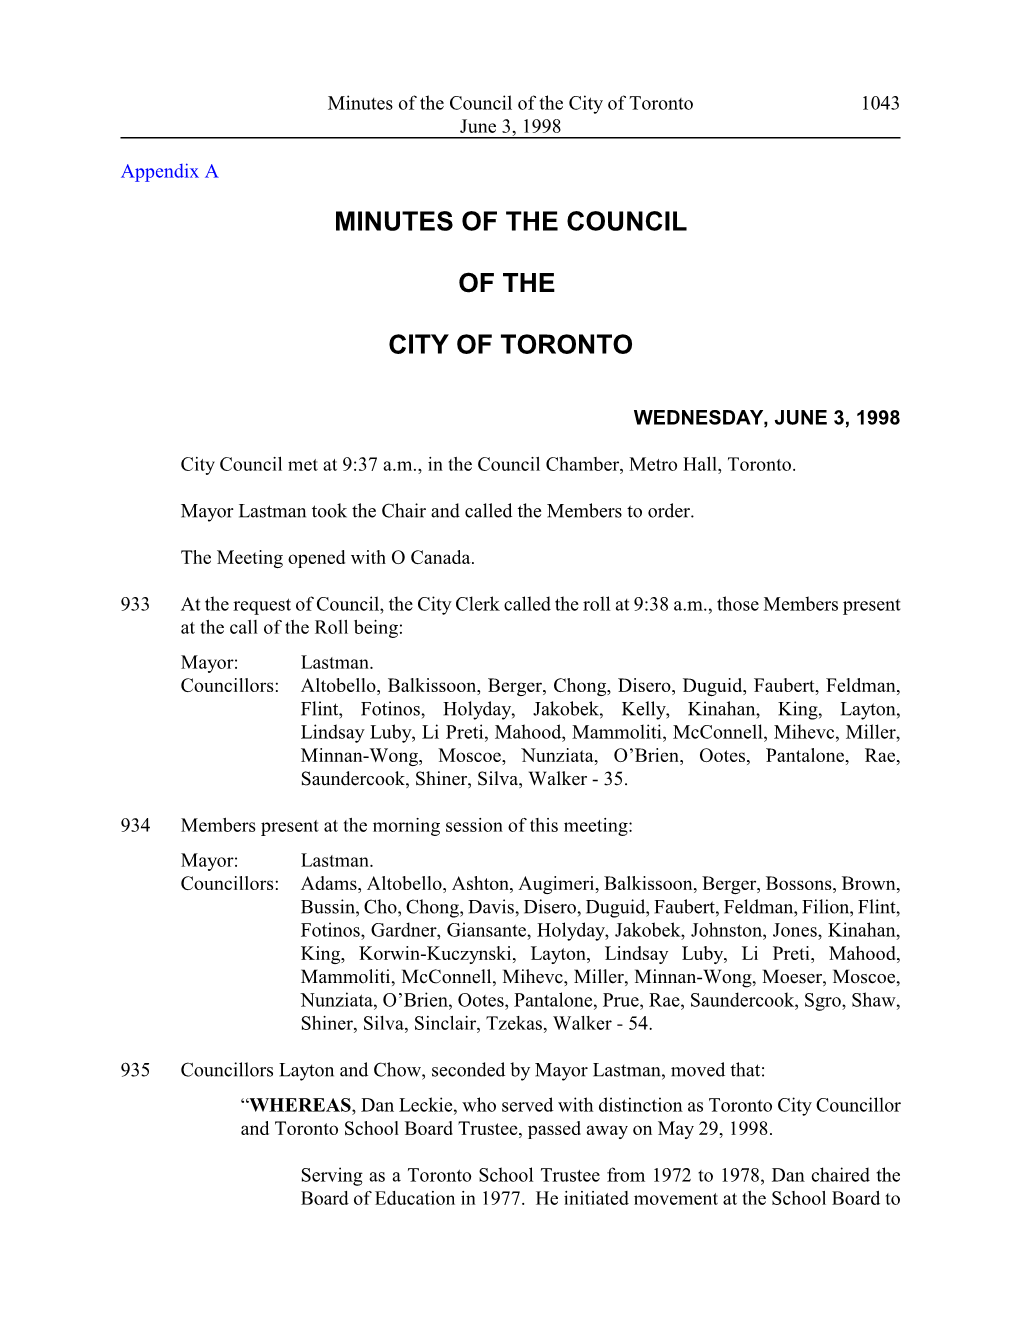 Minutes of the Council of the City of Toronto 1043 June 3, 1998